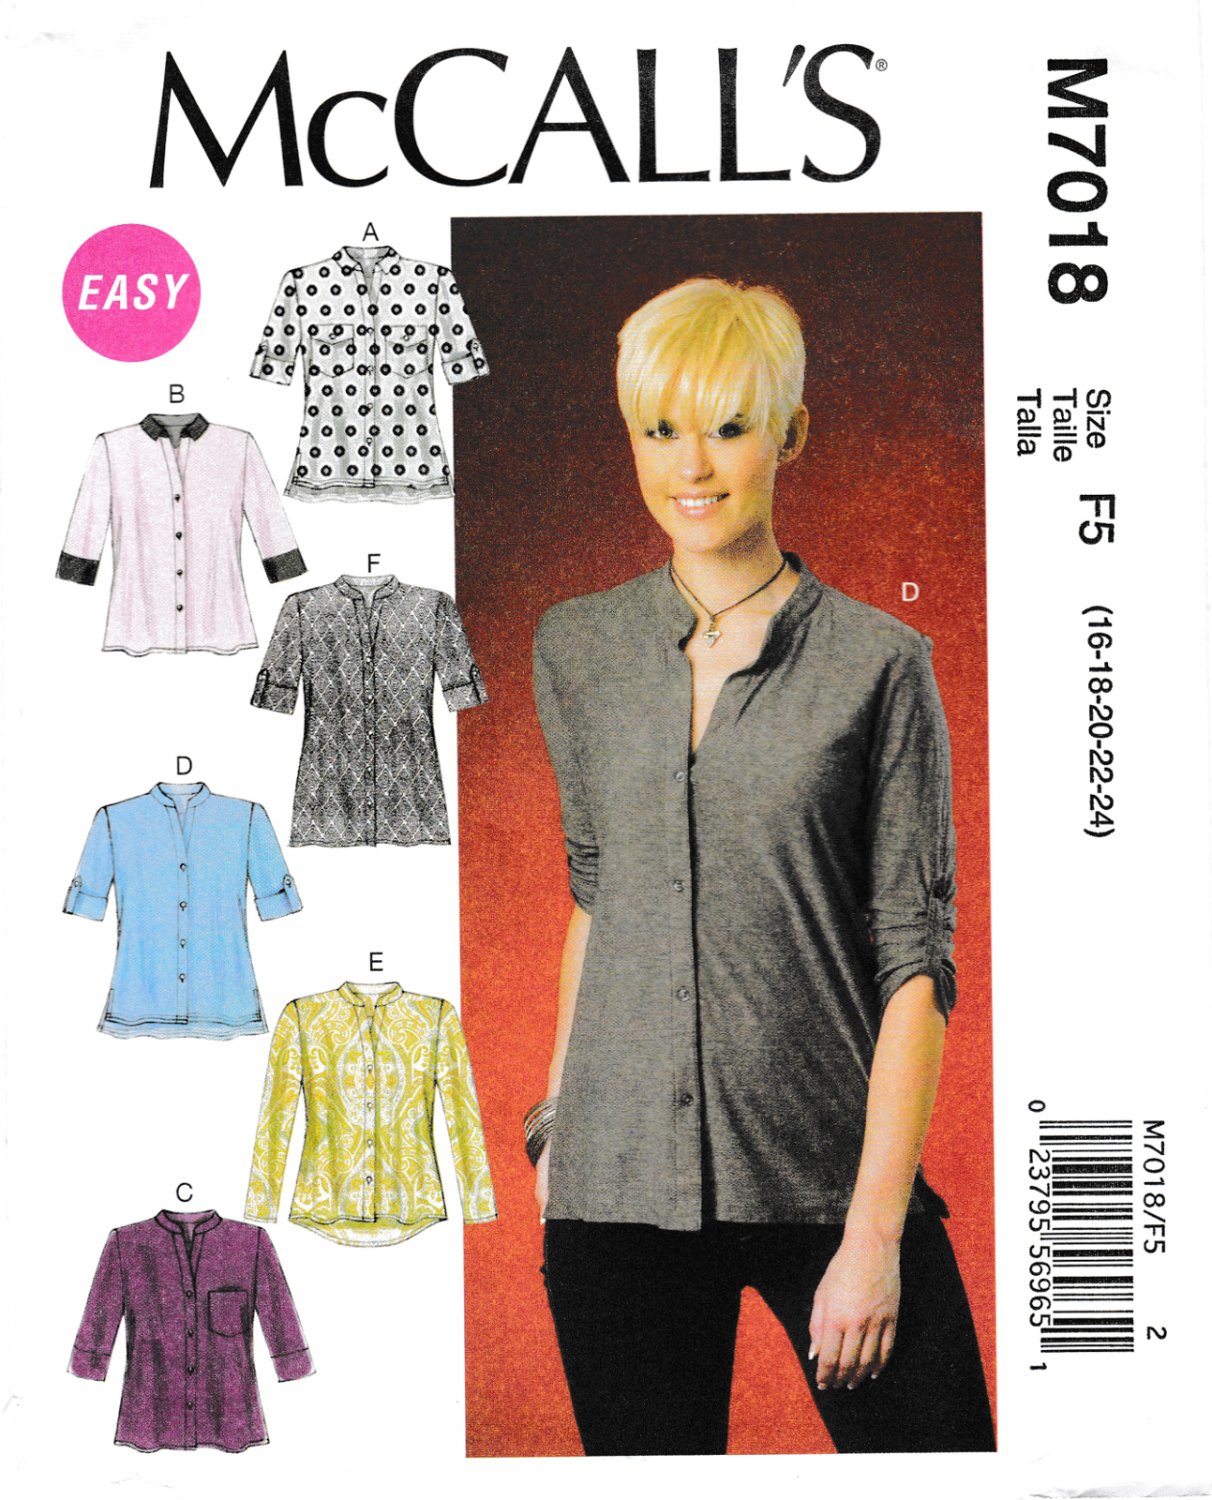 McCall's M7018 7018 Womens Tunics Tops Sewing Pattern Loose Fitting Easy Sizes 16-18-20-22-24